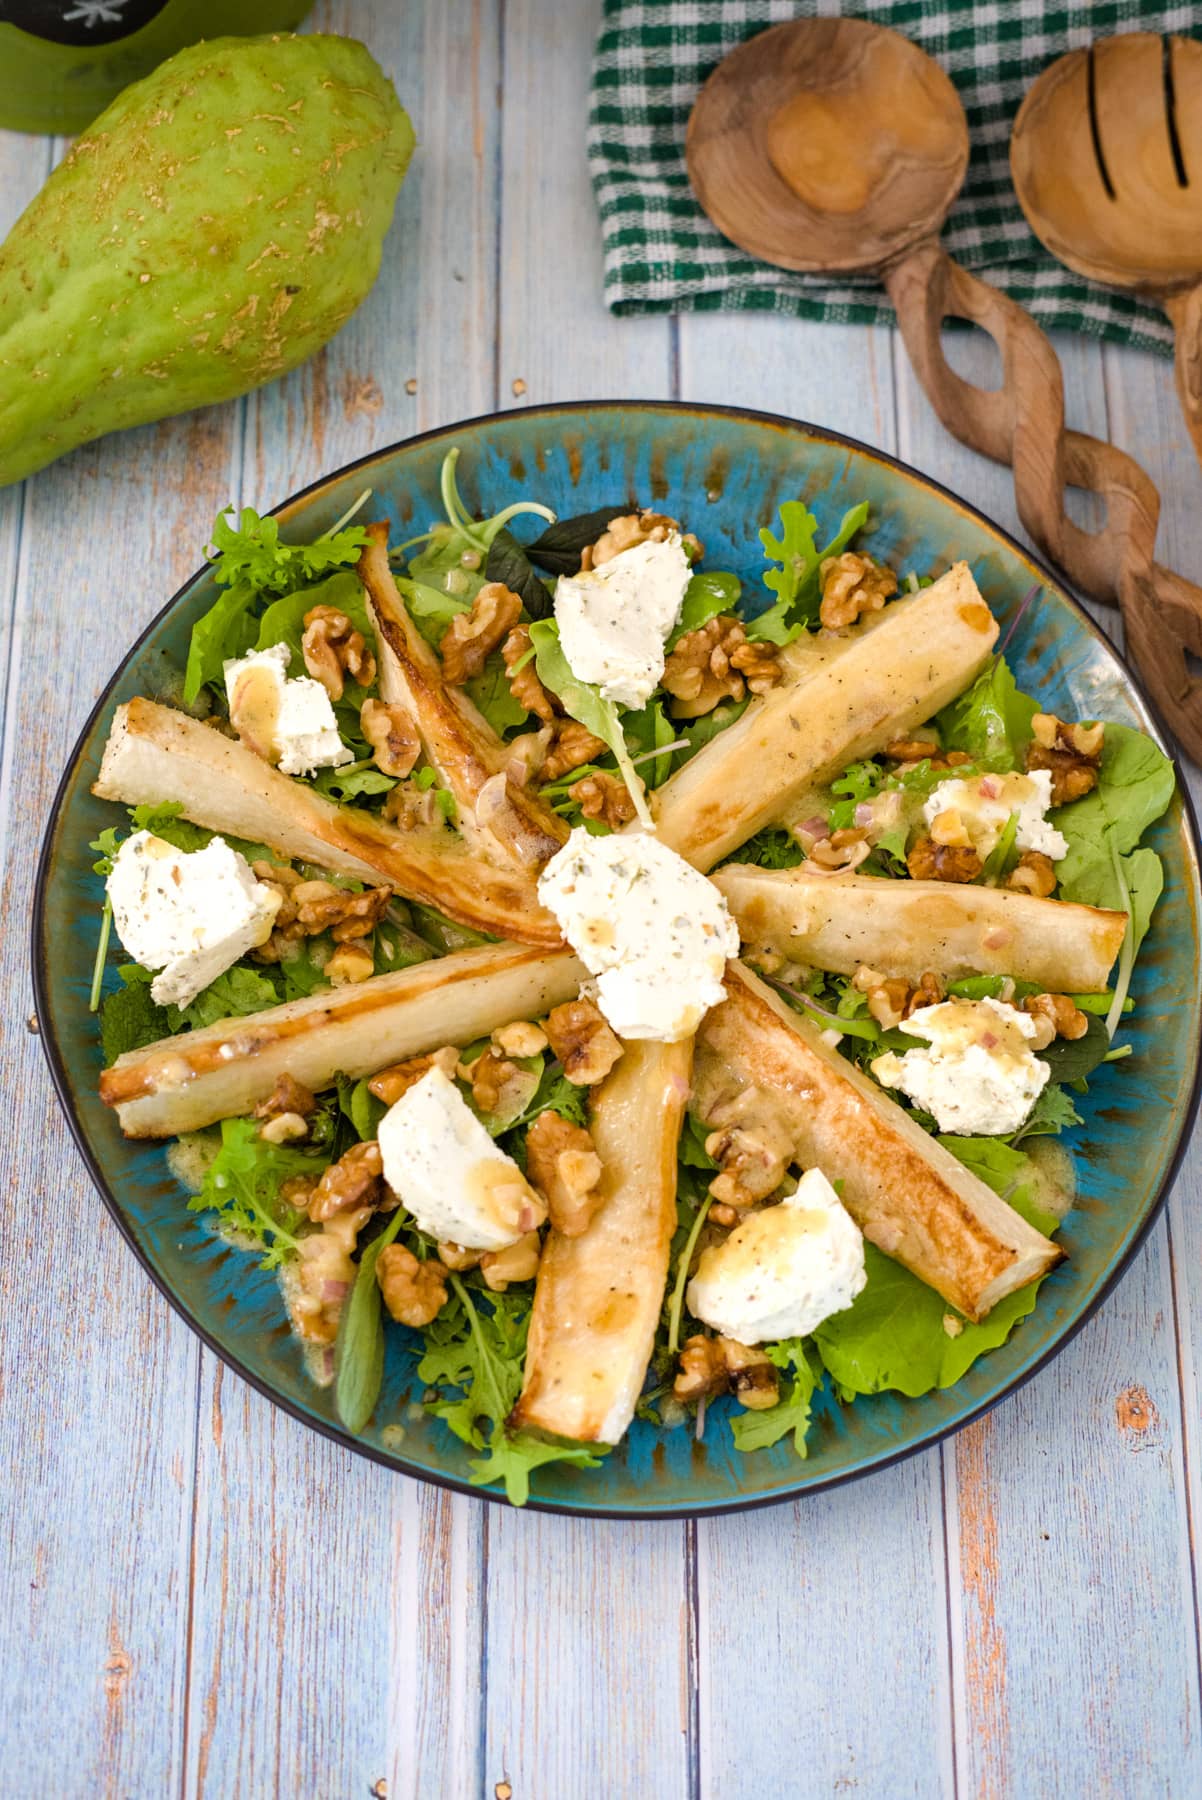 chayote salad with goats cheese